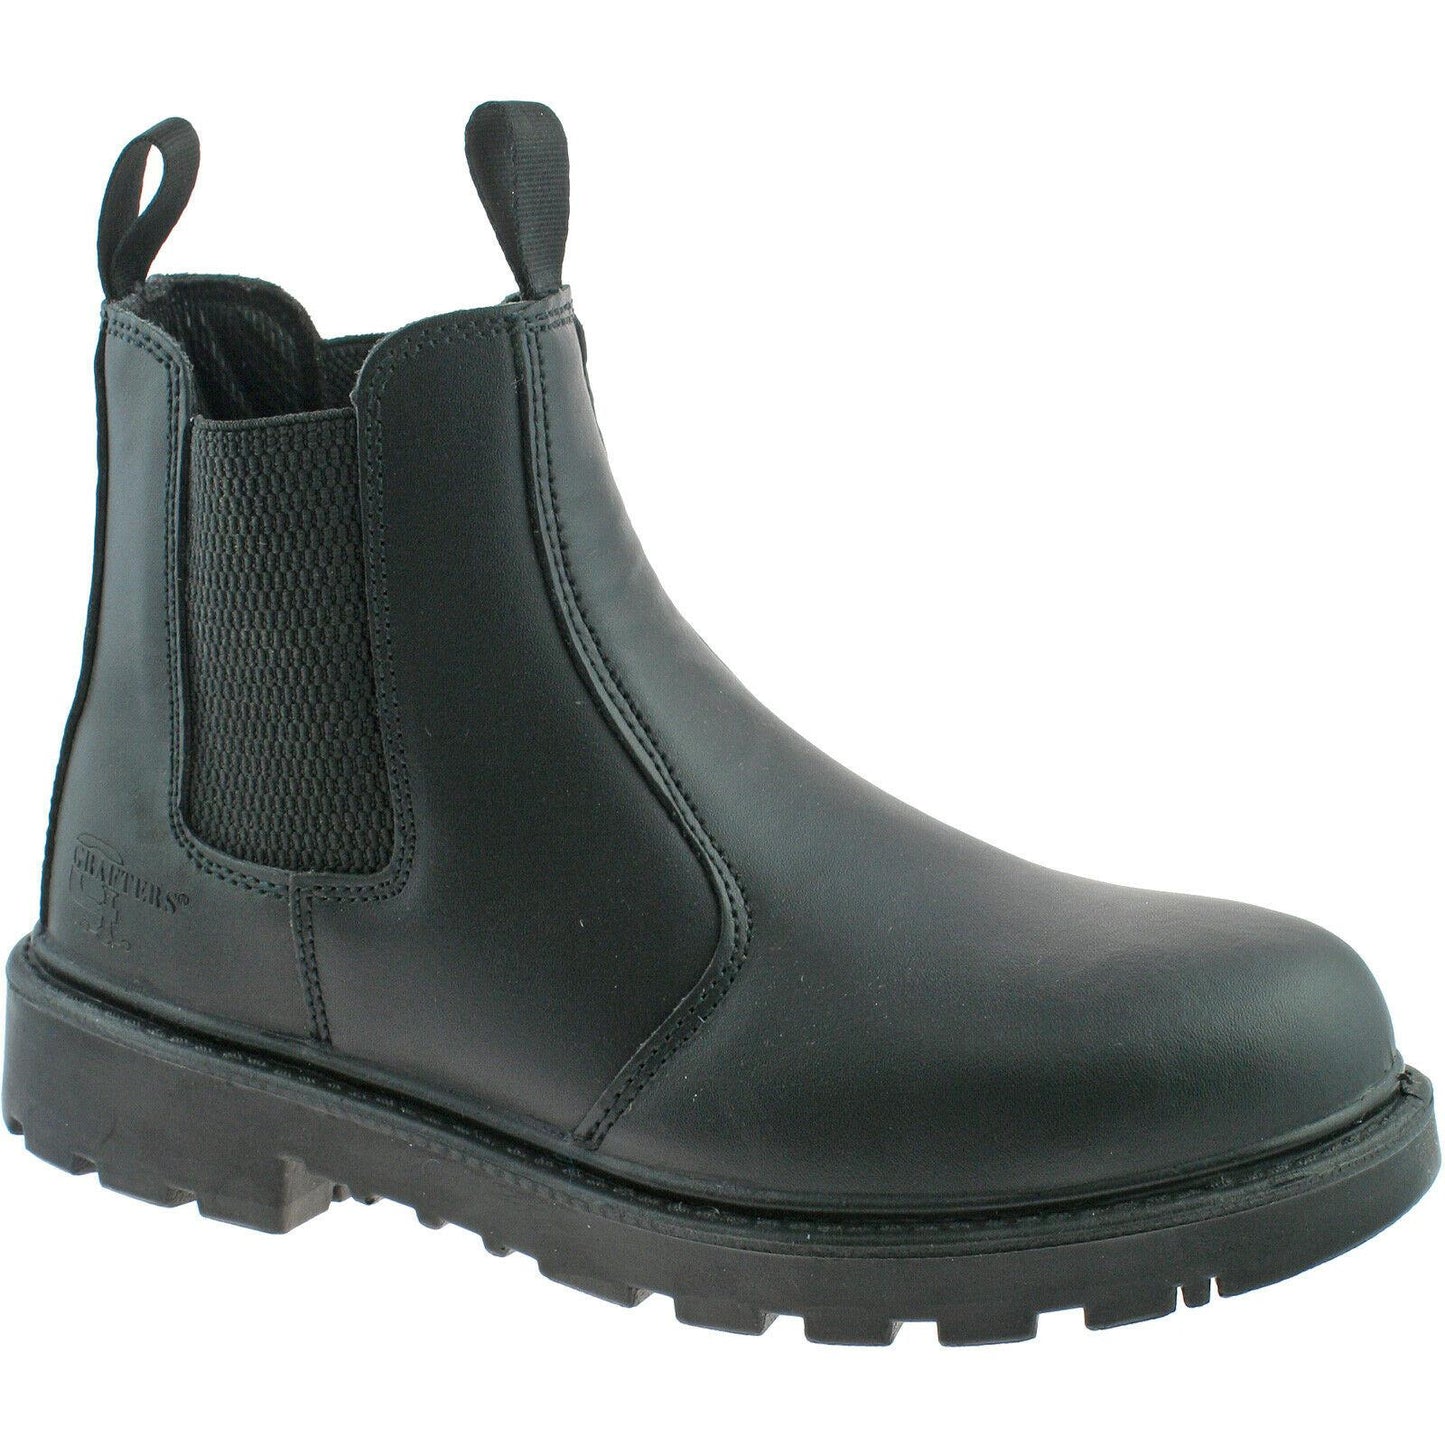 Grafters Safety Chelsea Dealer Boots Size Uk 3 - 16 Work Black Or Brown M808